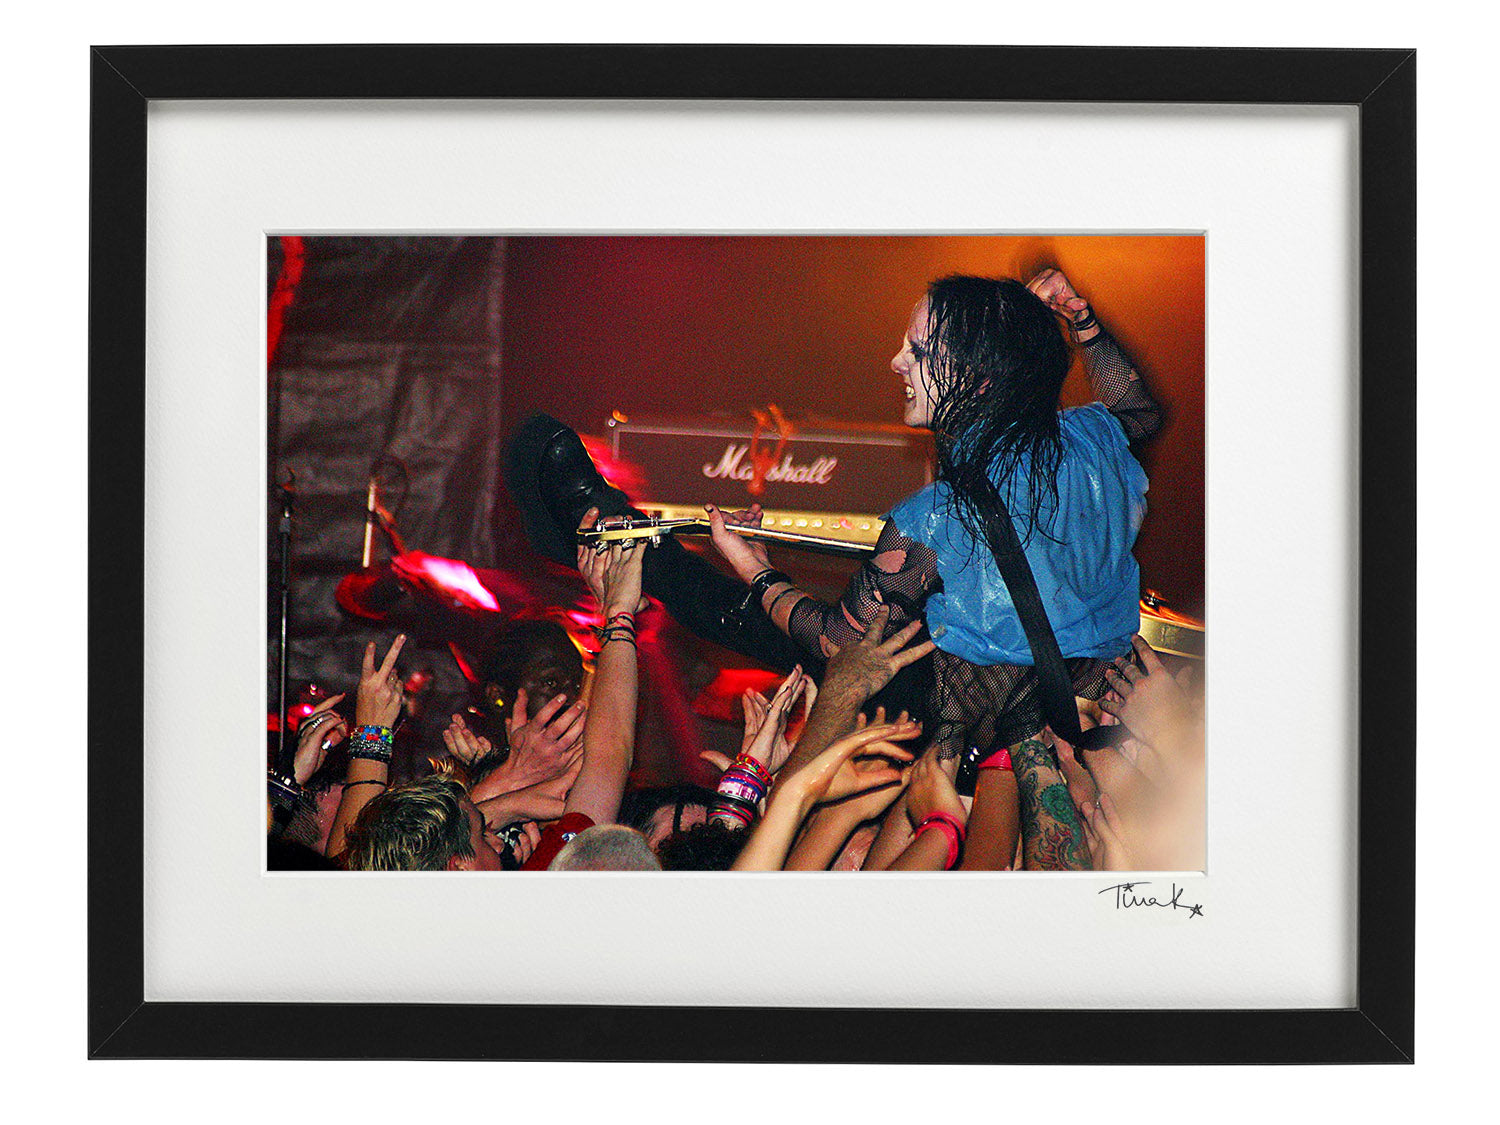 Joey Jordison (Slipknot, Murderdolls) crowdsurfing with his Gibson guitar at The Garage 2002. Framed print by Tina K Photography.